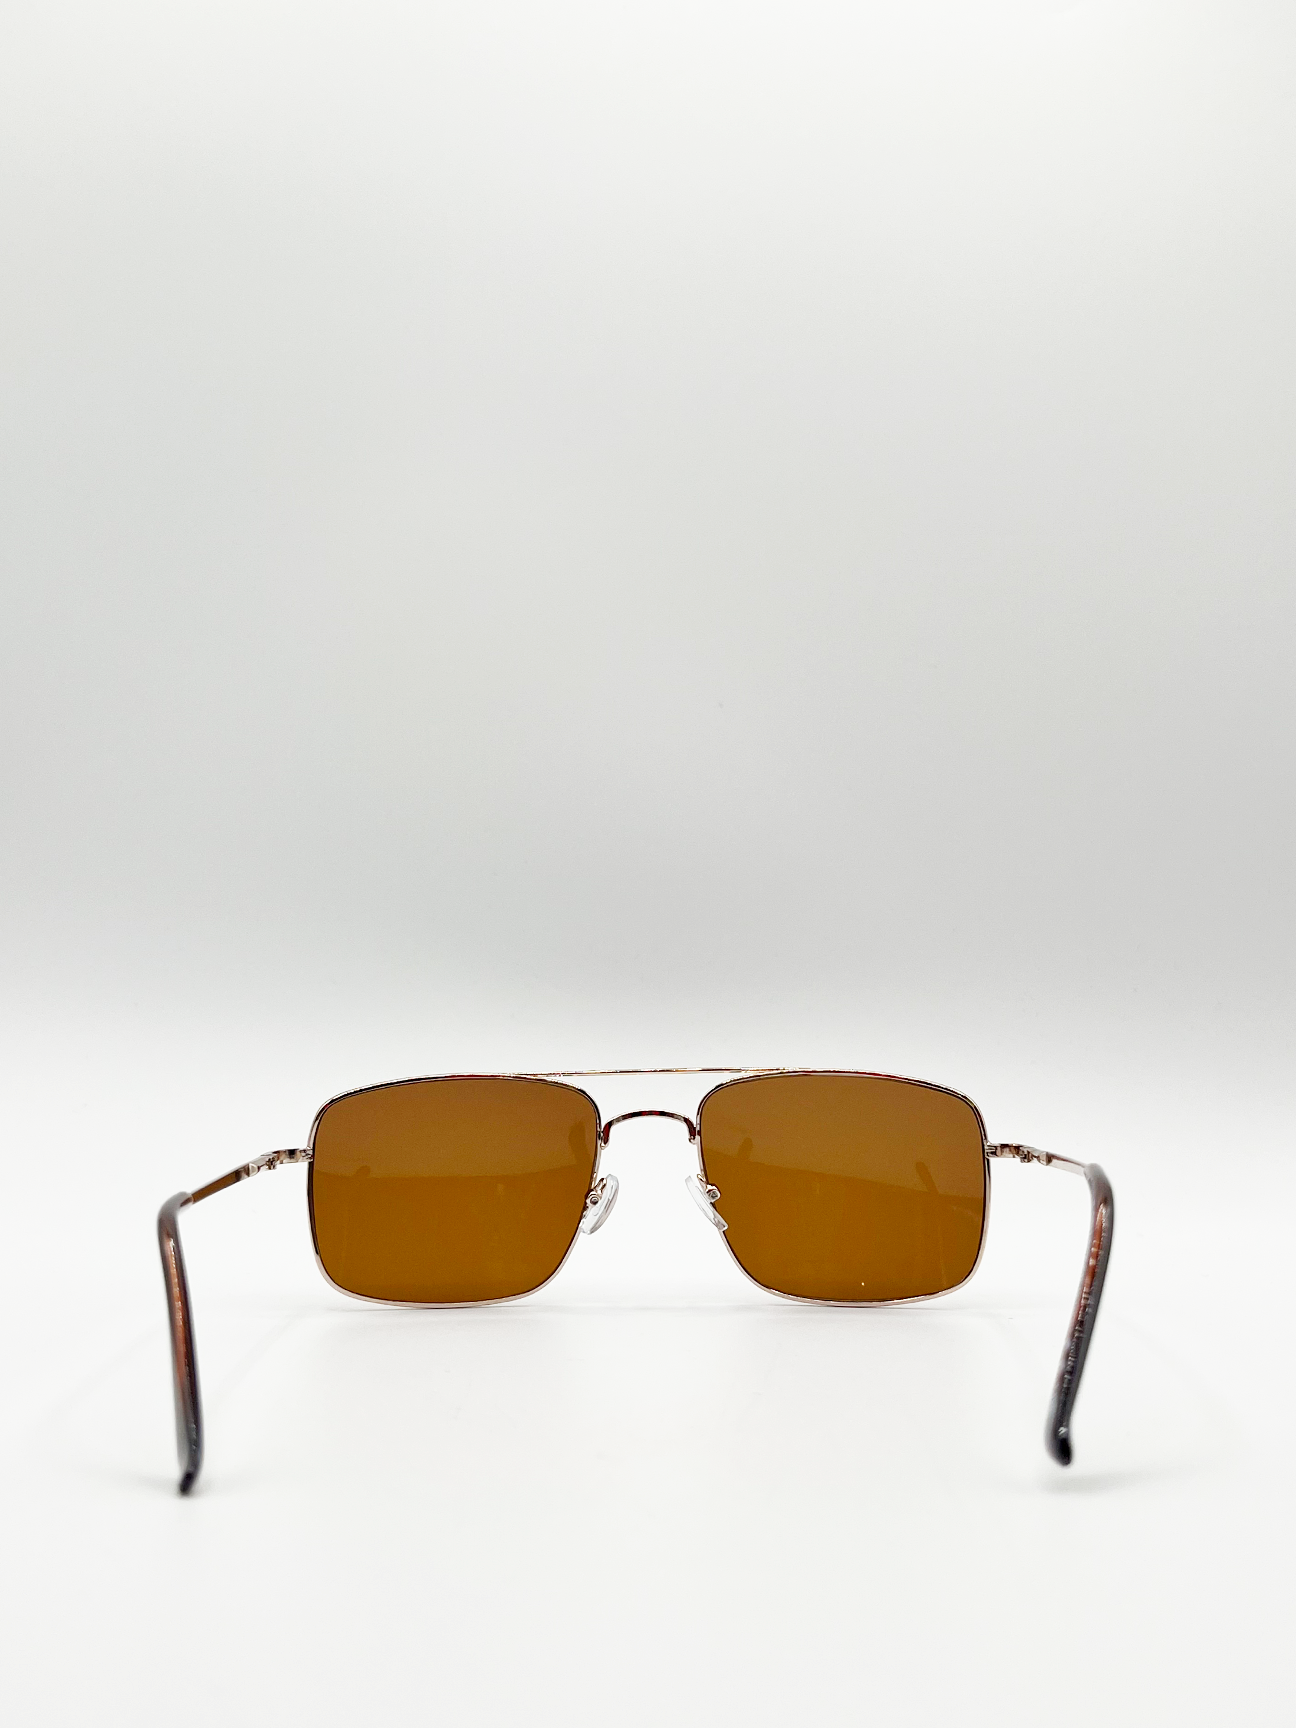 Gold Aviator Style Angular Sunglasses with Brown Lenses